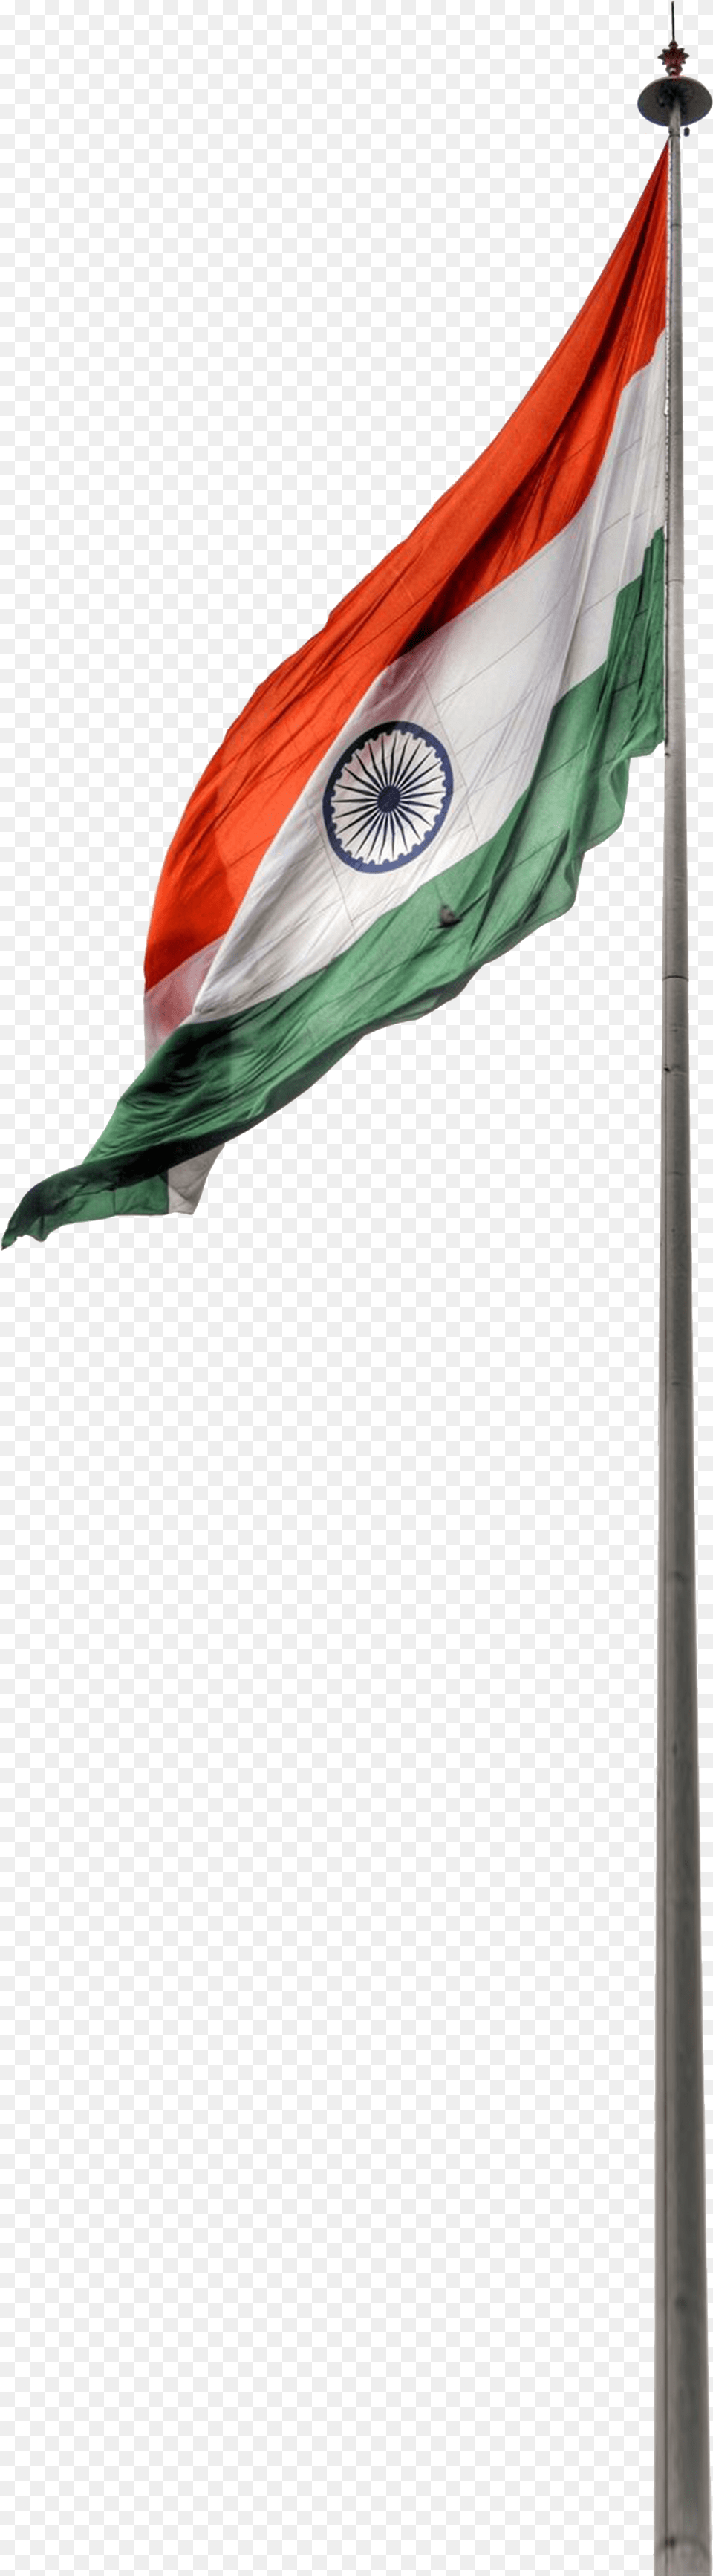 Indian Flag With Soldiers, India Flag Free Transparent Png